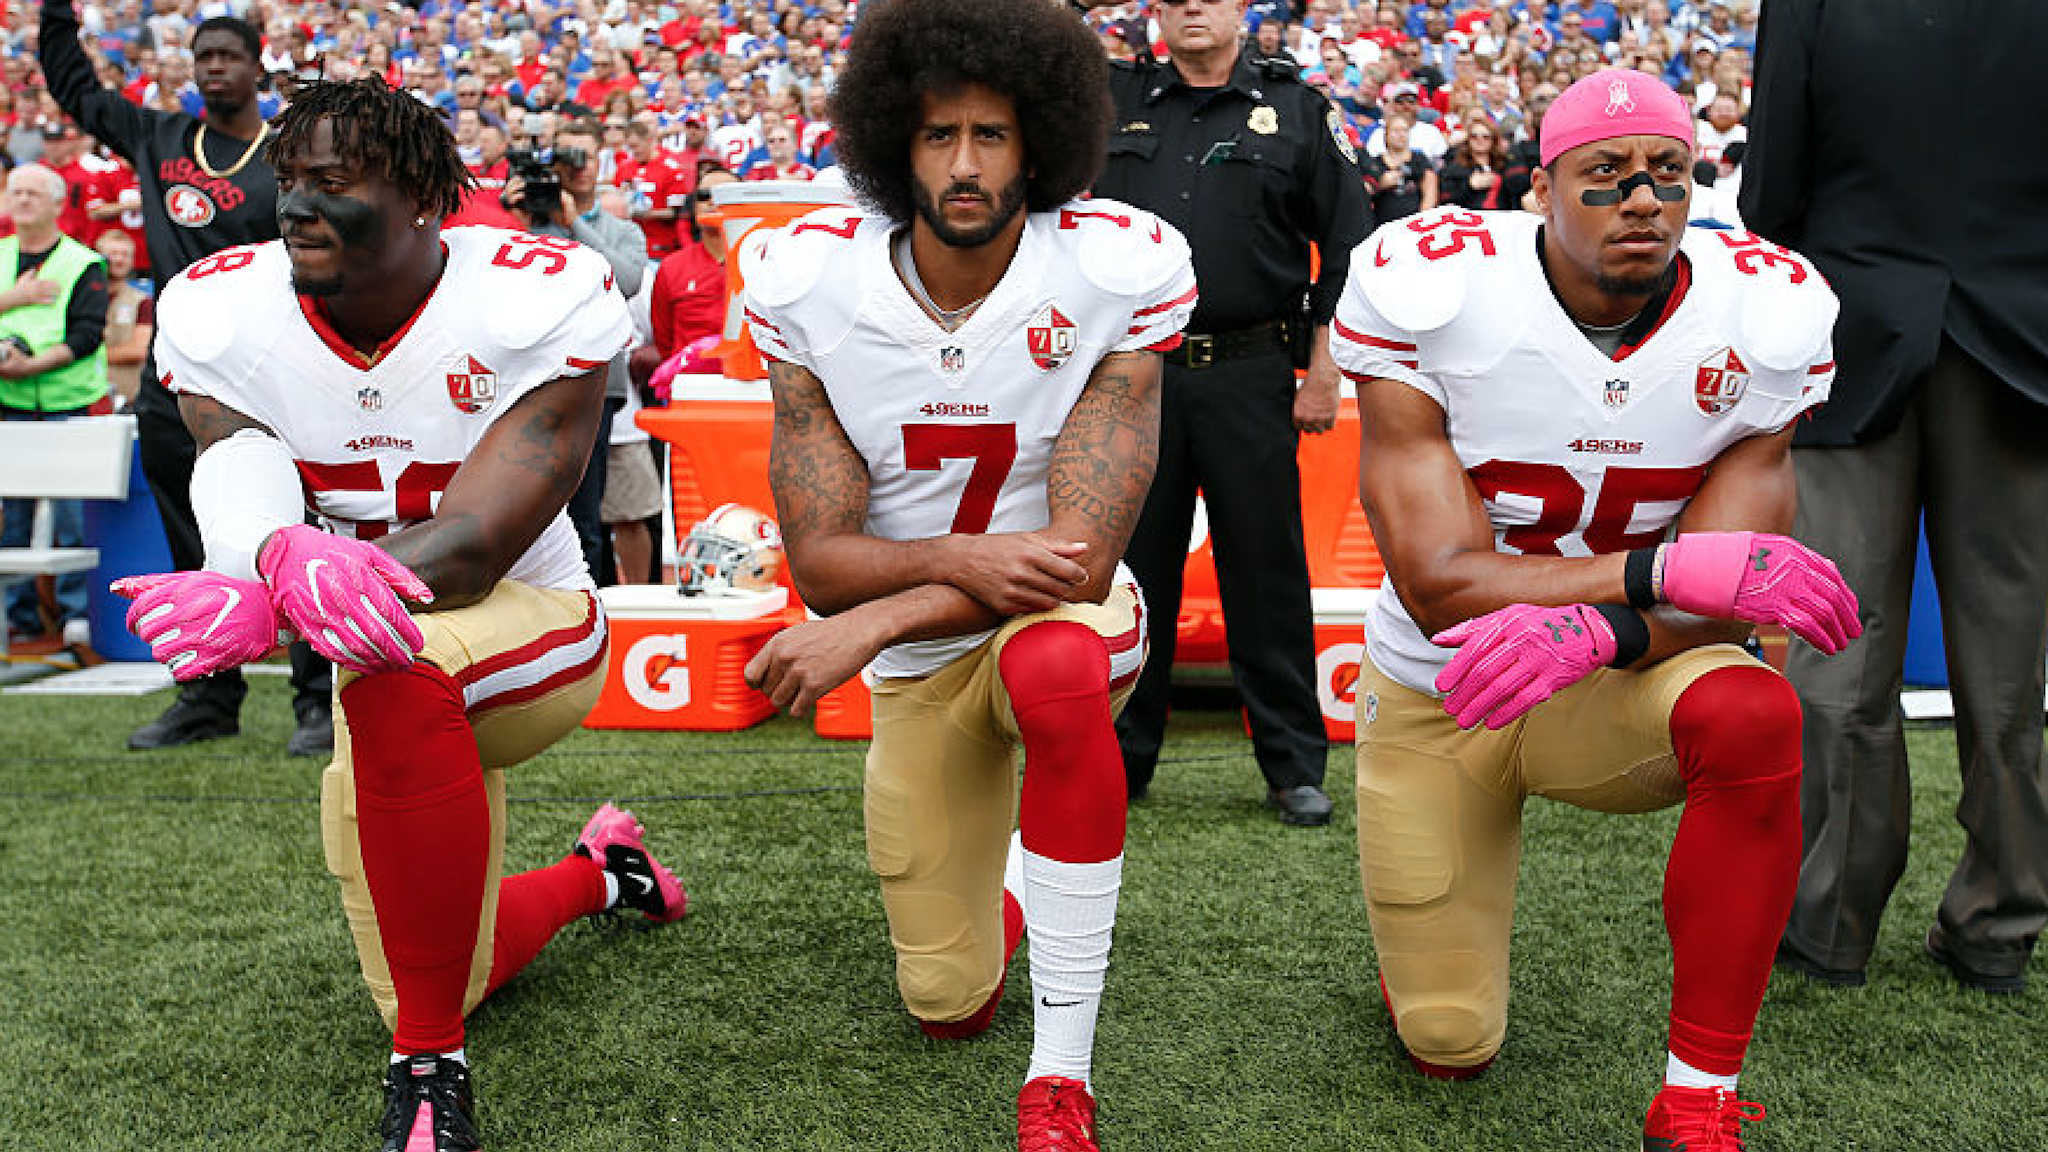 Eli Harold #58, Colin Kaepernick #7 and Eric Reid #35 of the San Francisco 49ers kneel in protest on the sideline, during the anthem, prior to the game against the Buffalo Bills at New Era Field on October 16, 2016 in Orchard Park, New York.